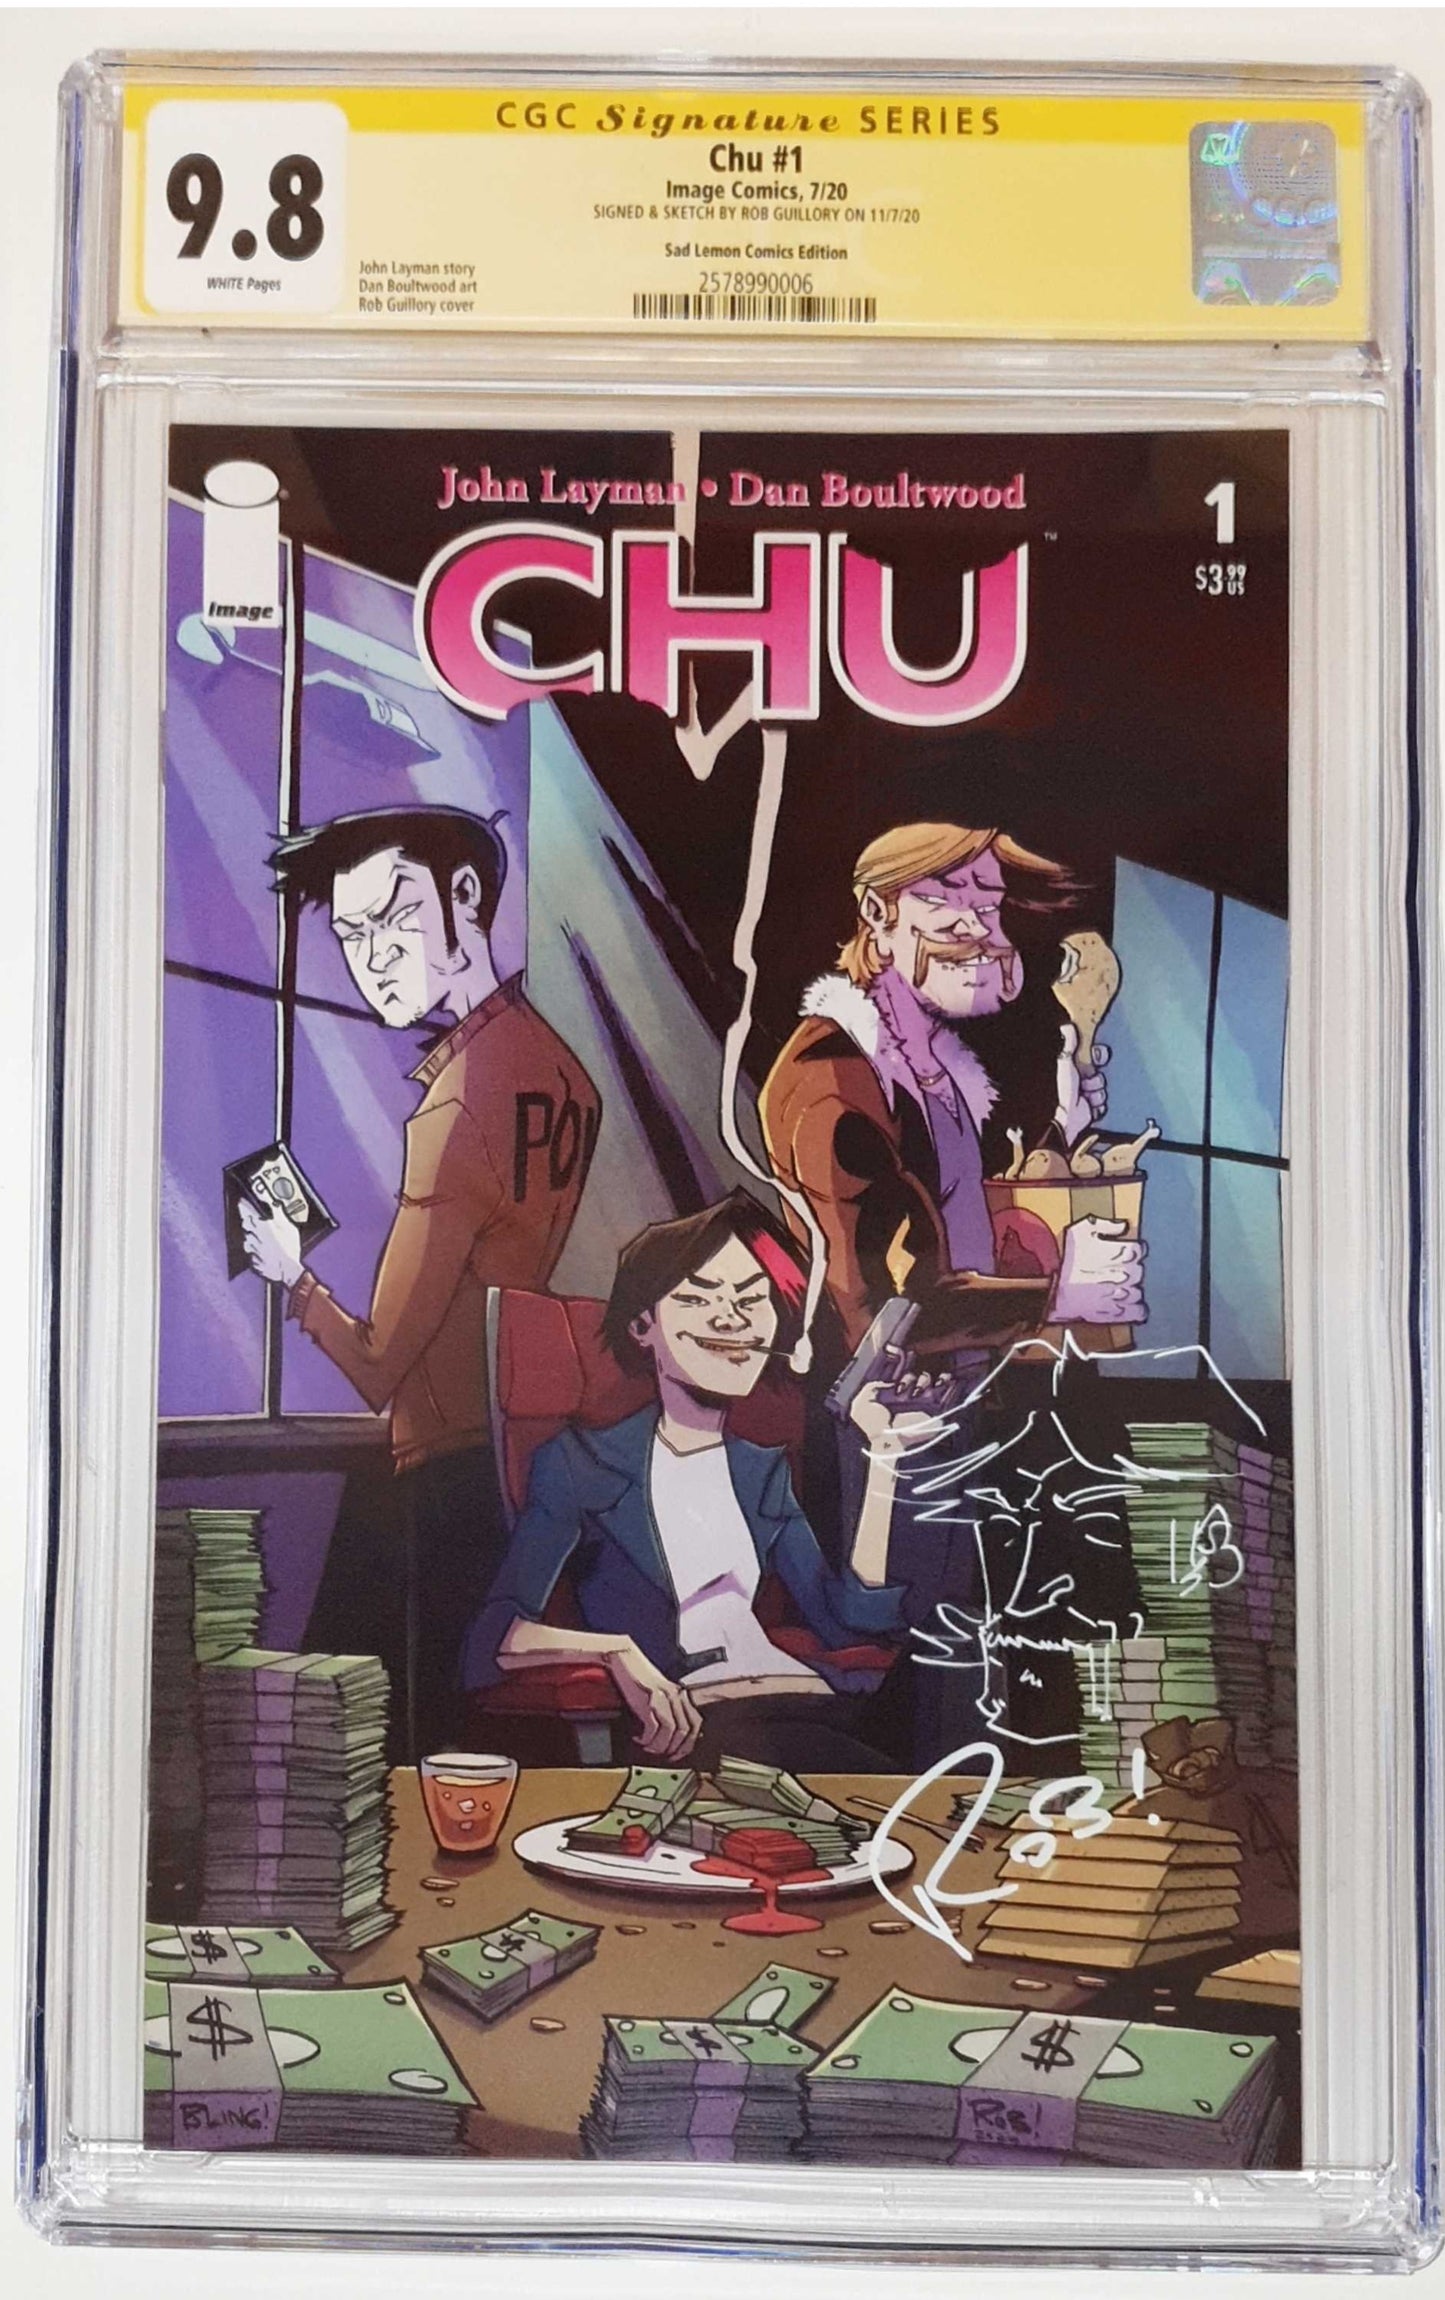 CHU #1 ROB GUILLORY VARIANT LIMITED TO 500 COPIES CGC 9.8 JOHN REMARK